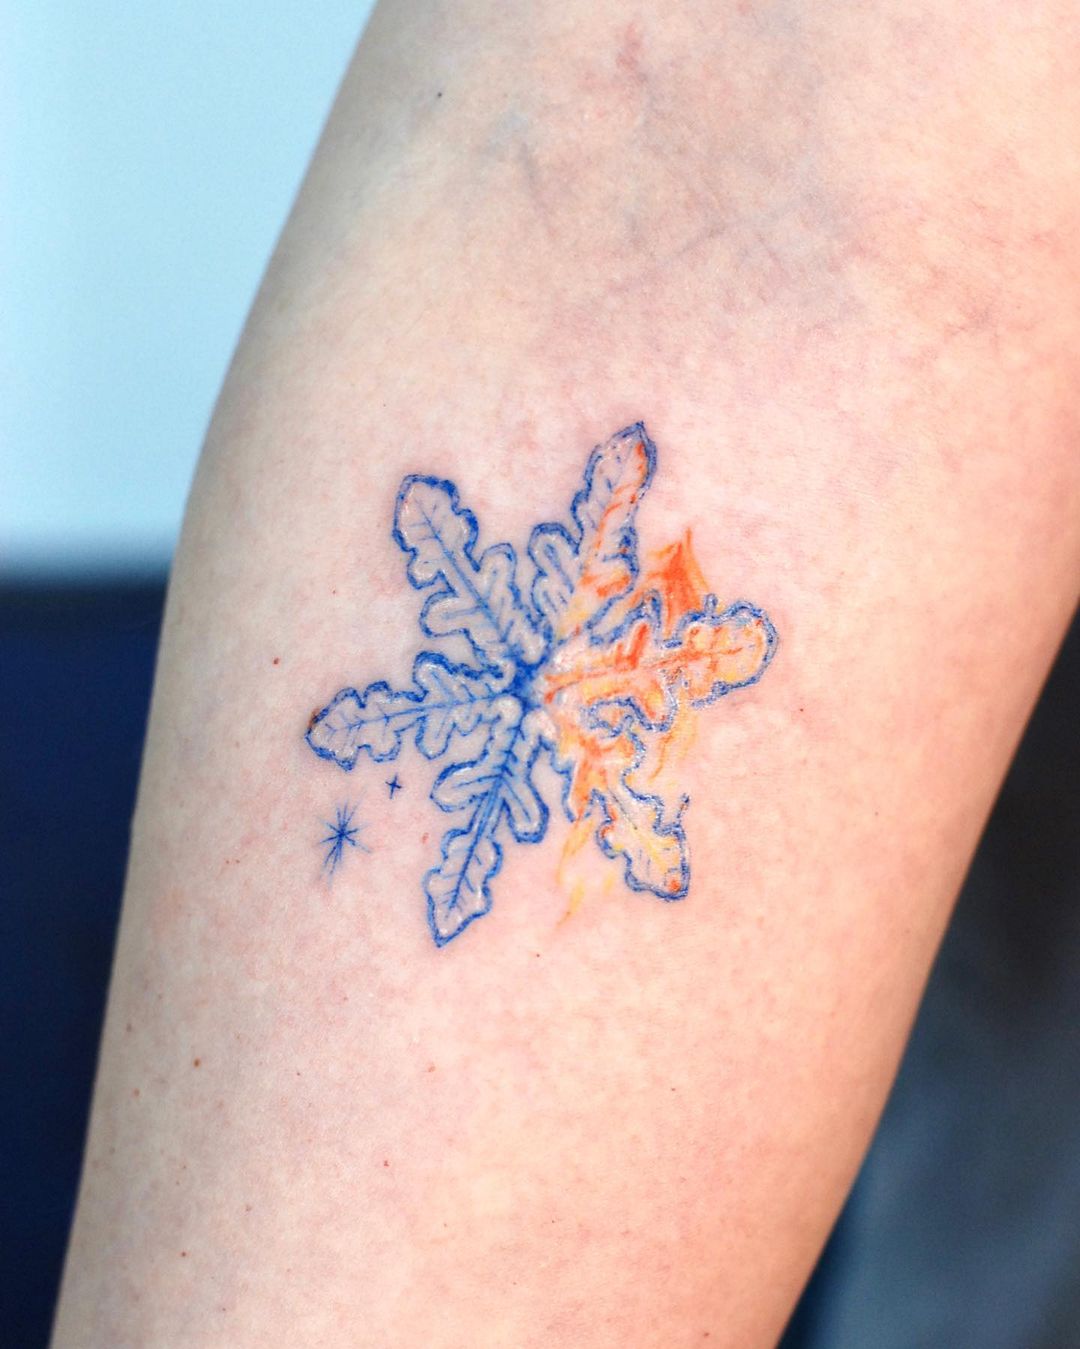 colored snowflake tattoo ideas by second.pin